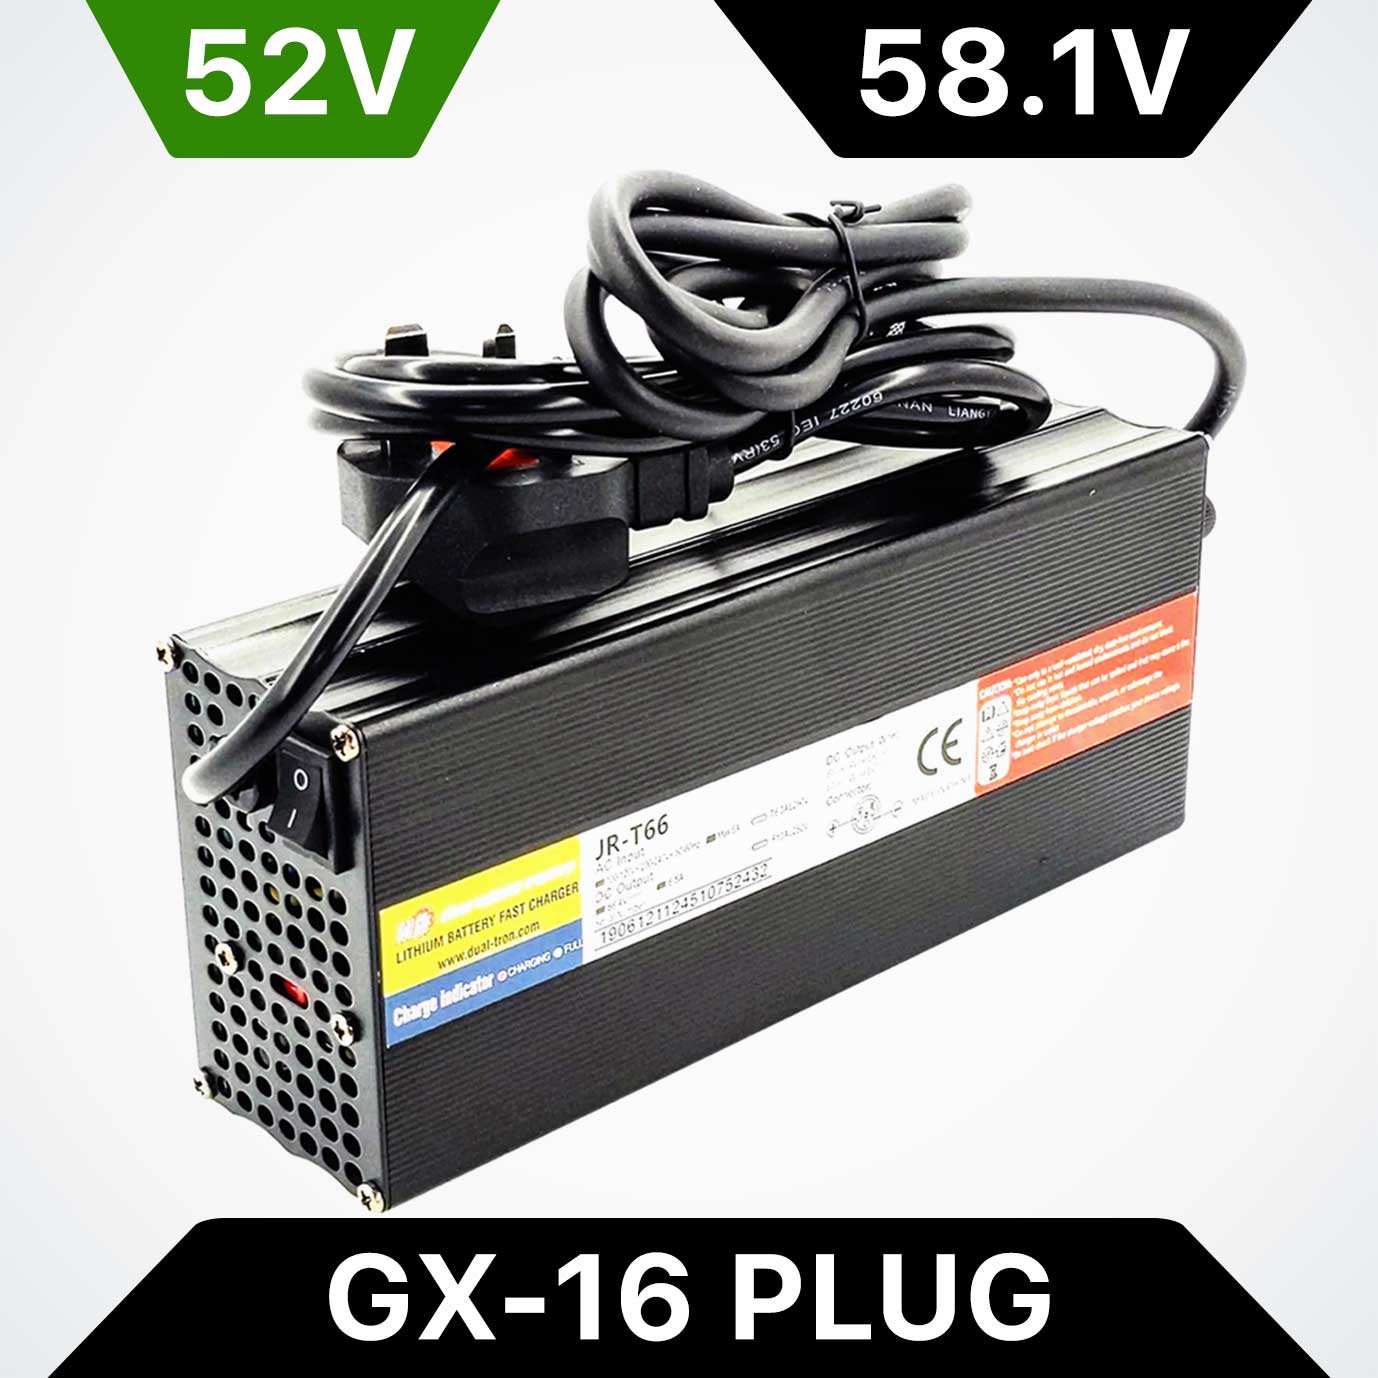 52V 7A Fast Charger for Dualtron, 58.1V Max, GX16 Plug